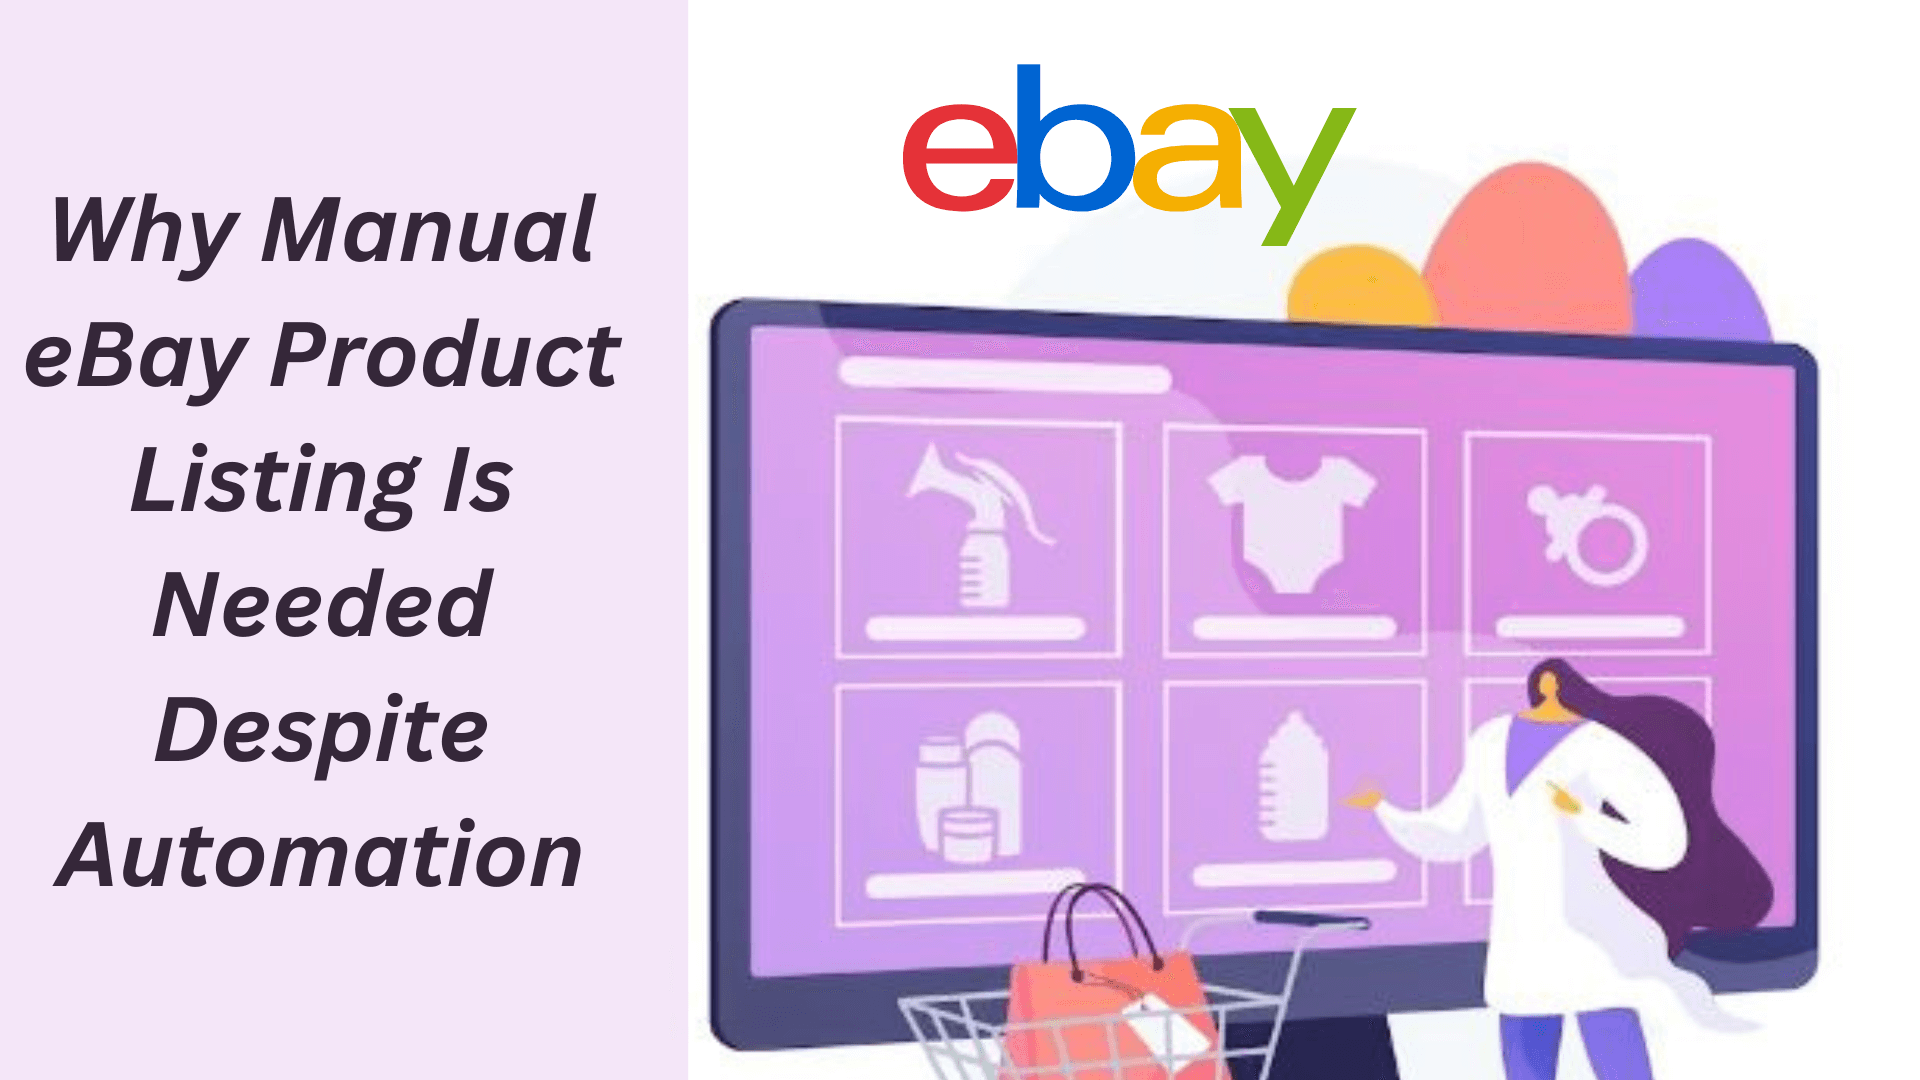 Why Manual eBay Product Listing Is Needed Despite Automation